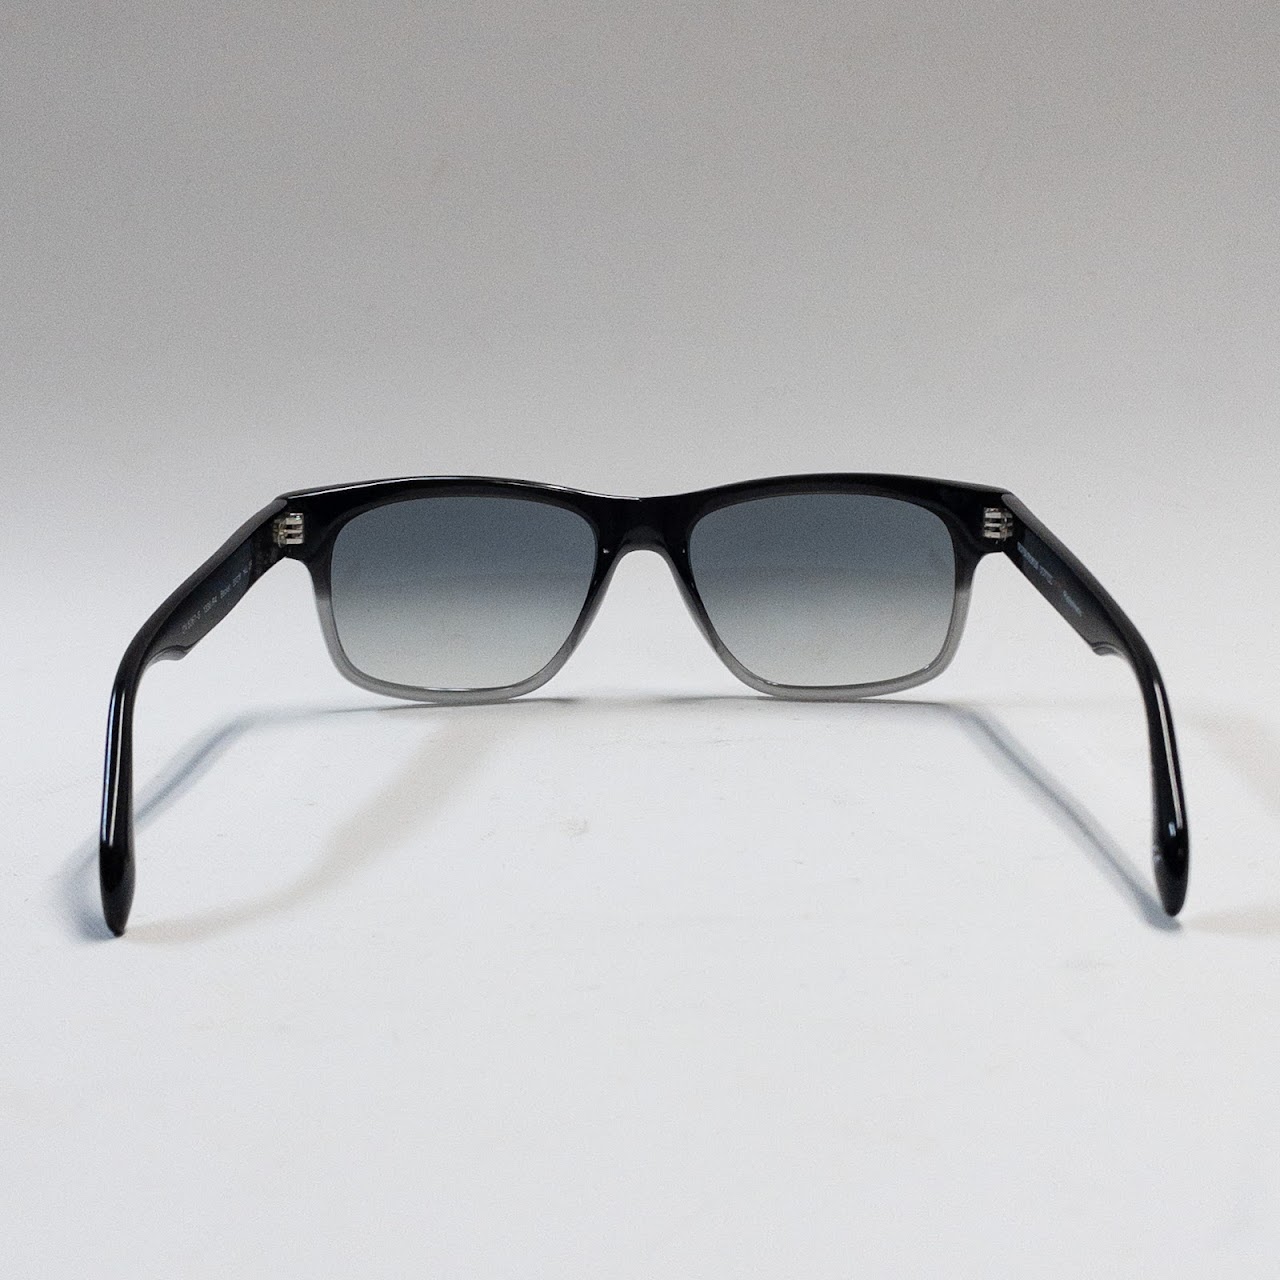 Oliver Peoples Becket Photochromic Sunglasses